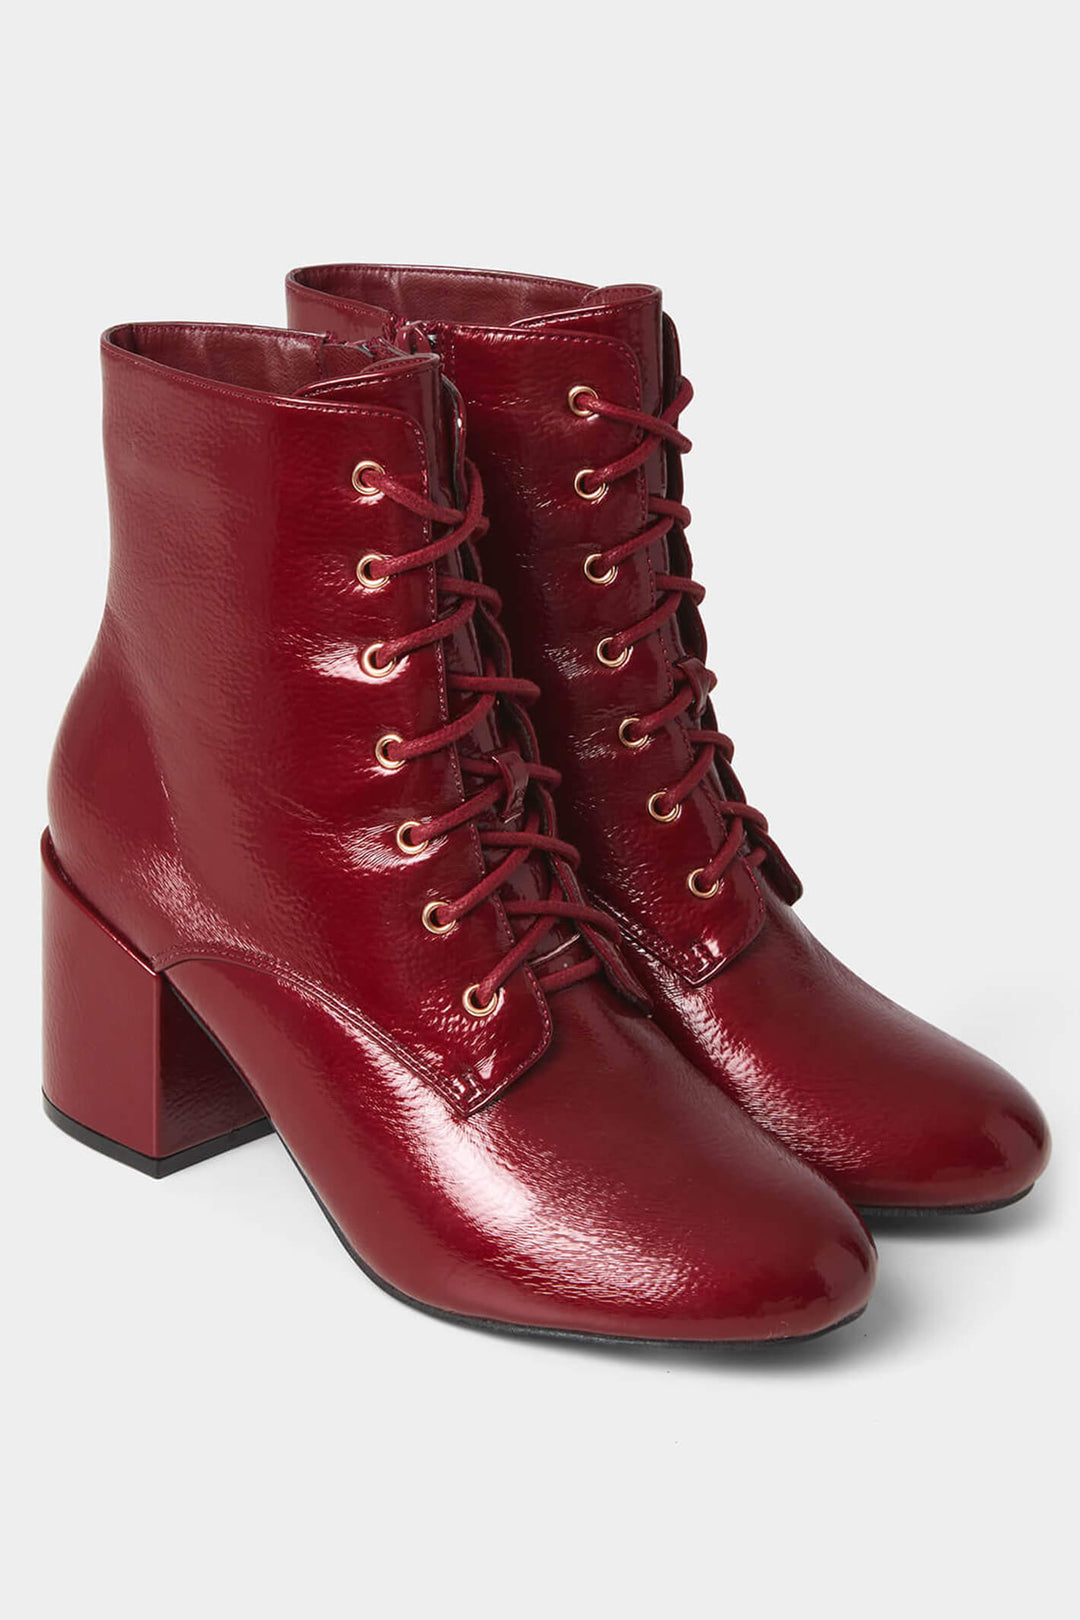 Joe Browns KA164 Red Love Letter Patent Boots - Experience Boutique